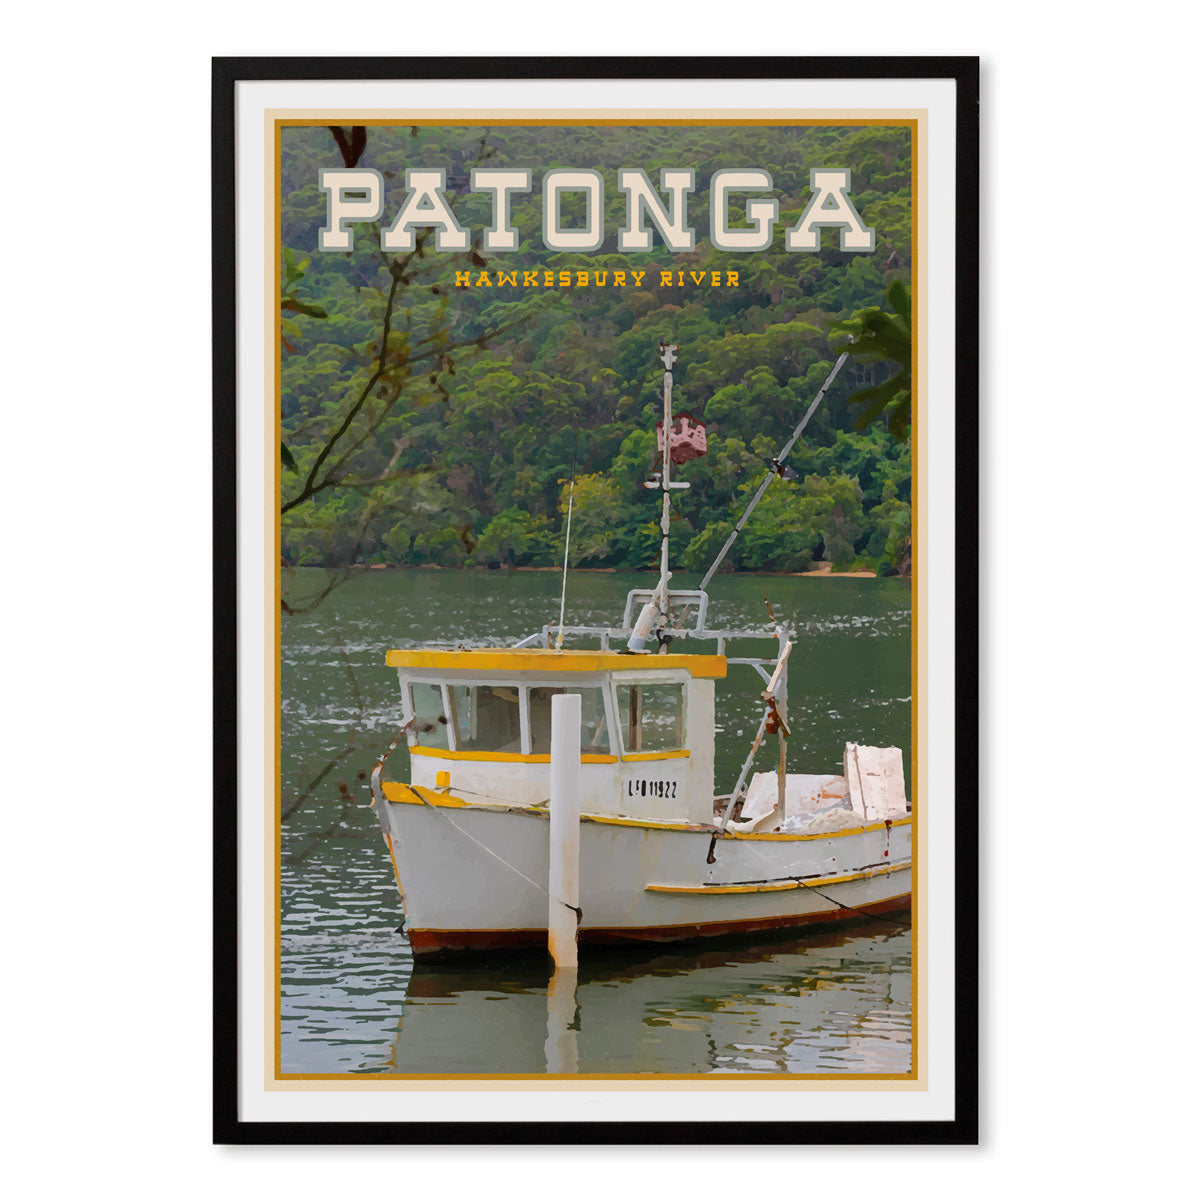 Patonga vintage travel style black framed print by places we luv